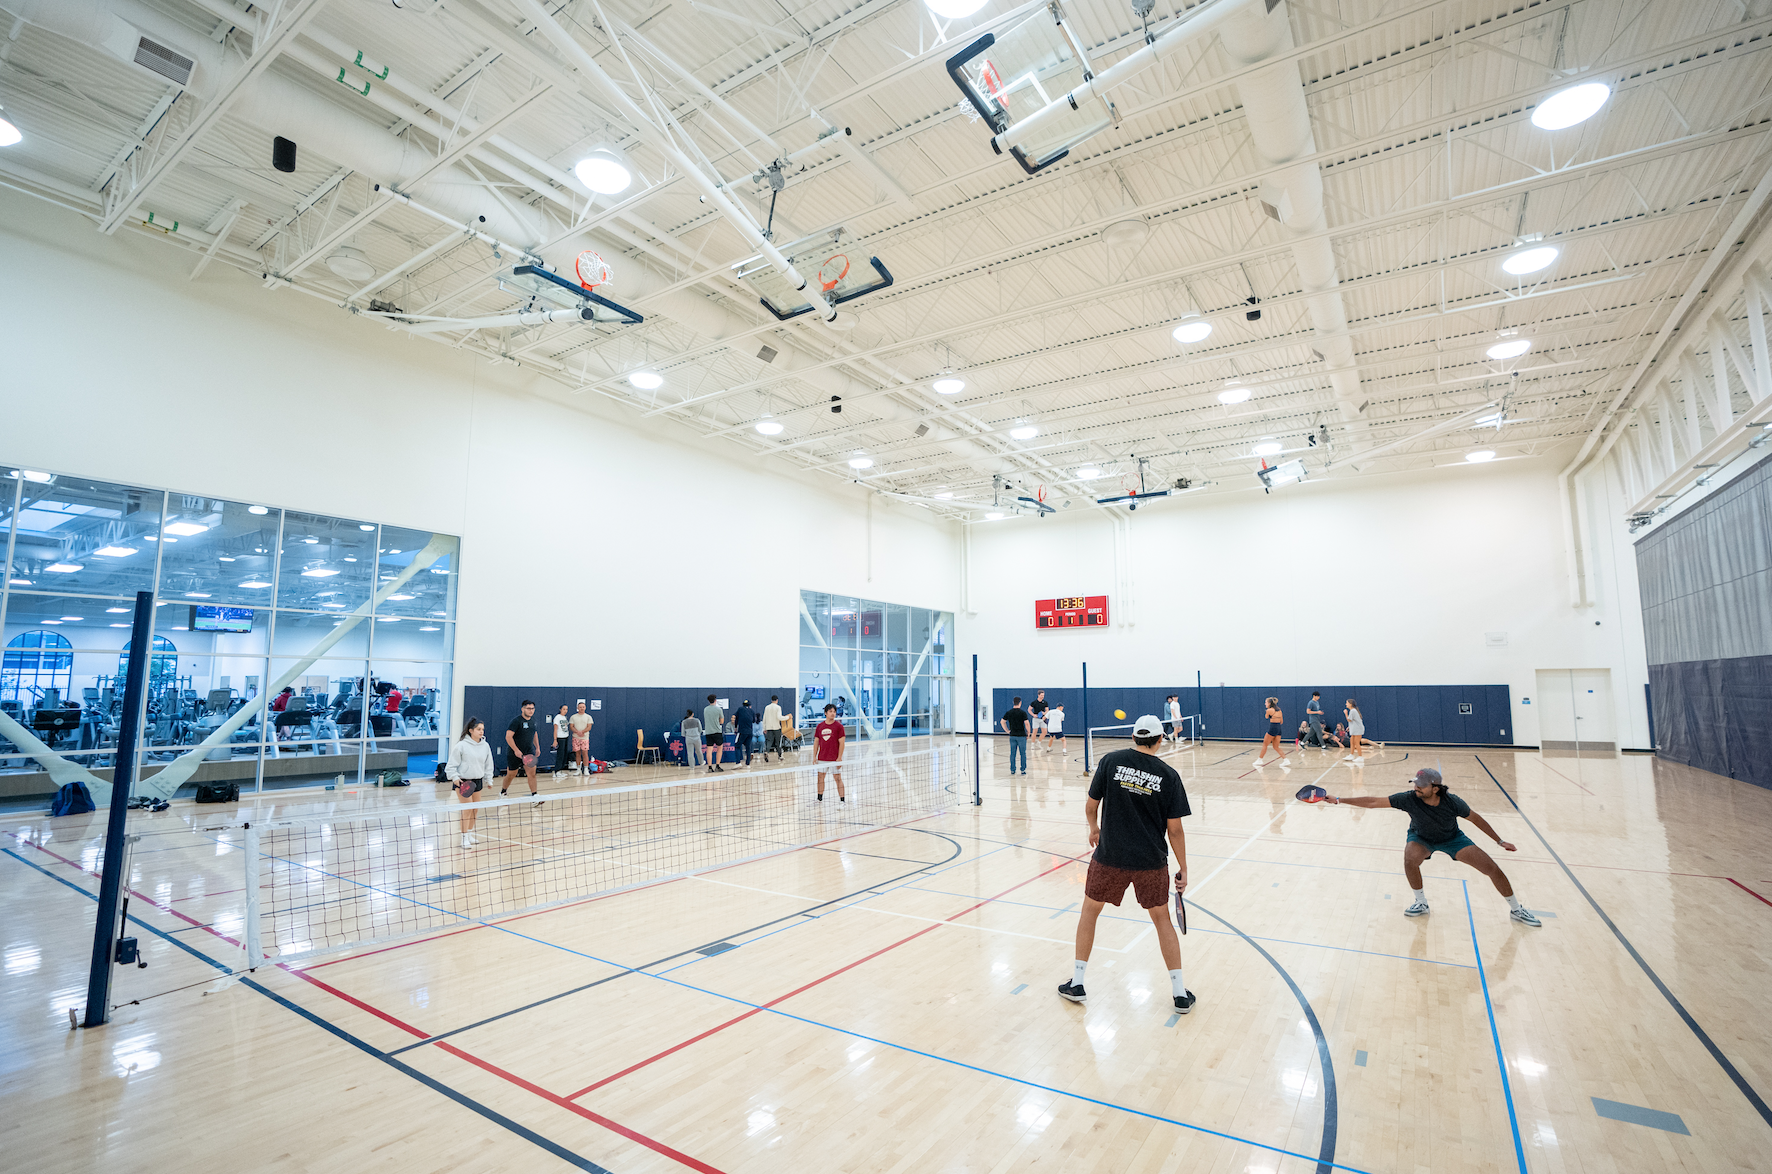 Pickleball courts in the Rec center